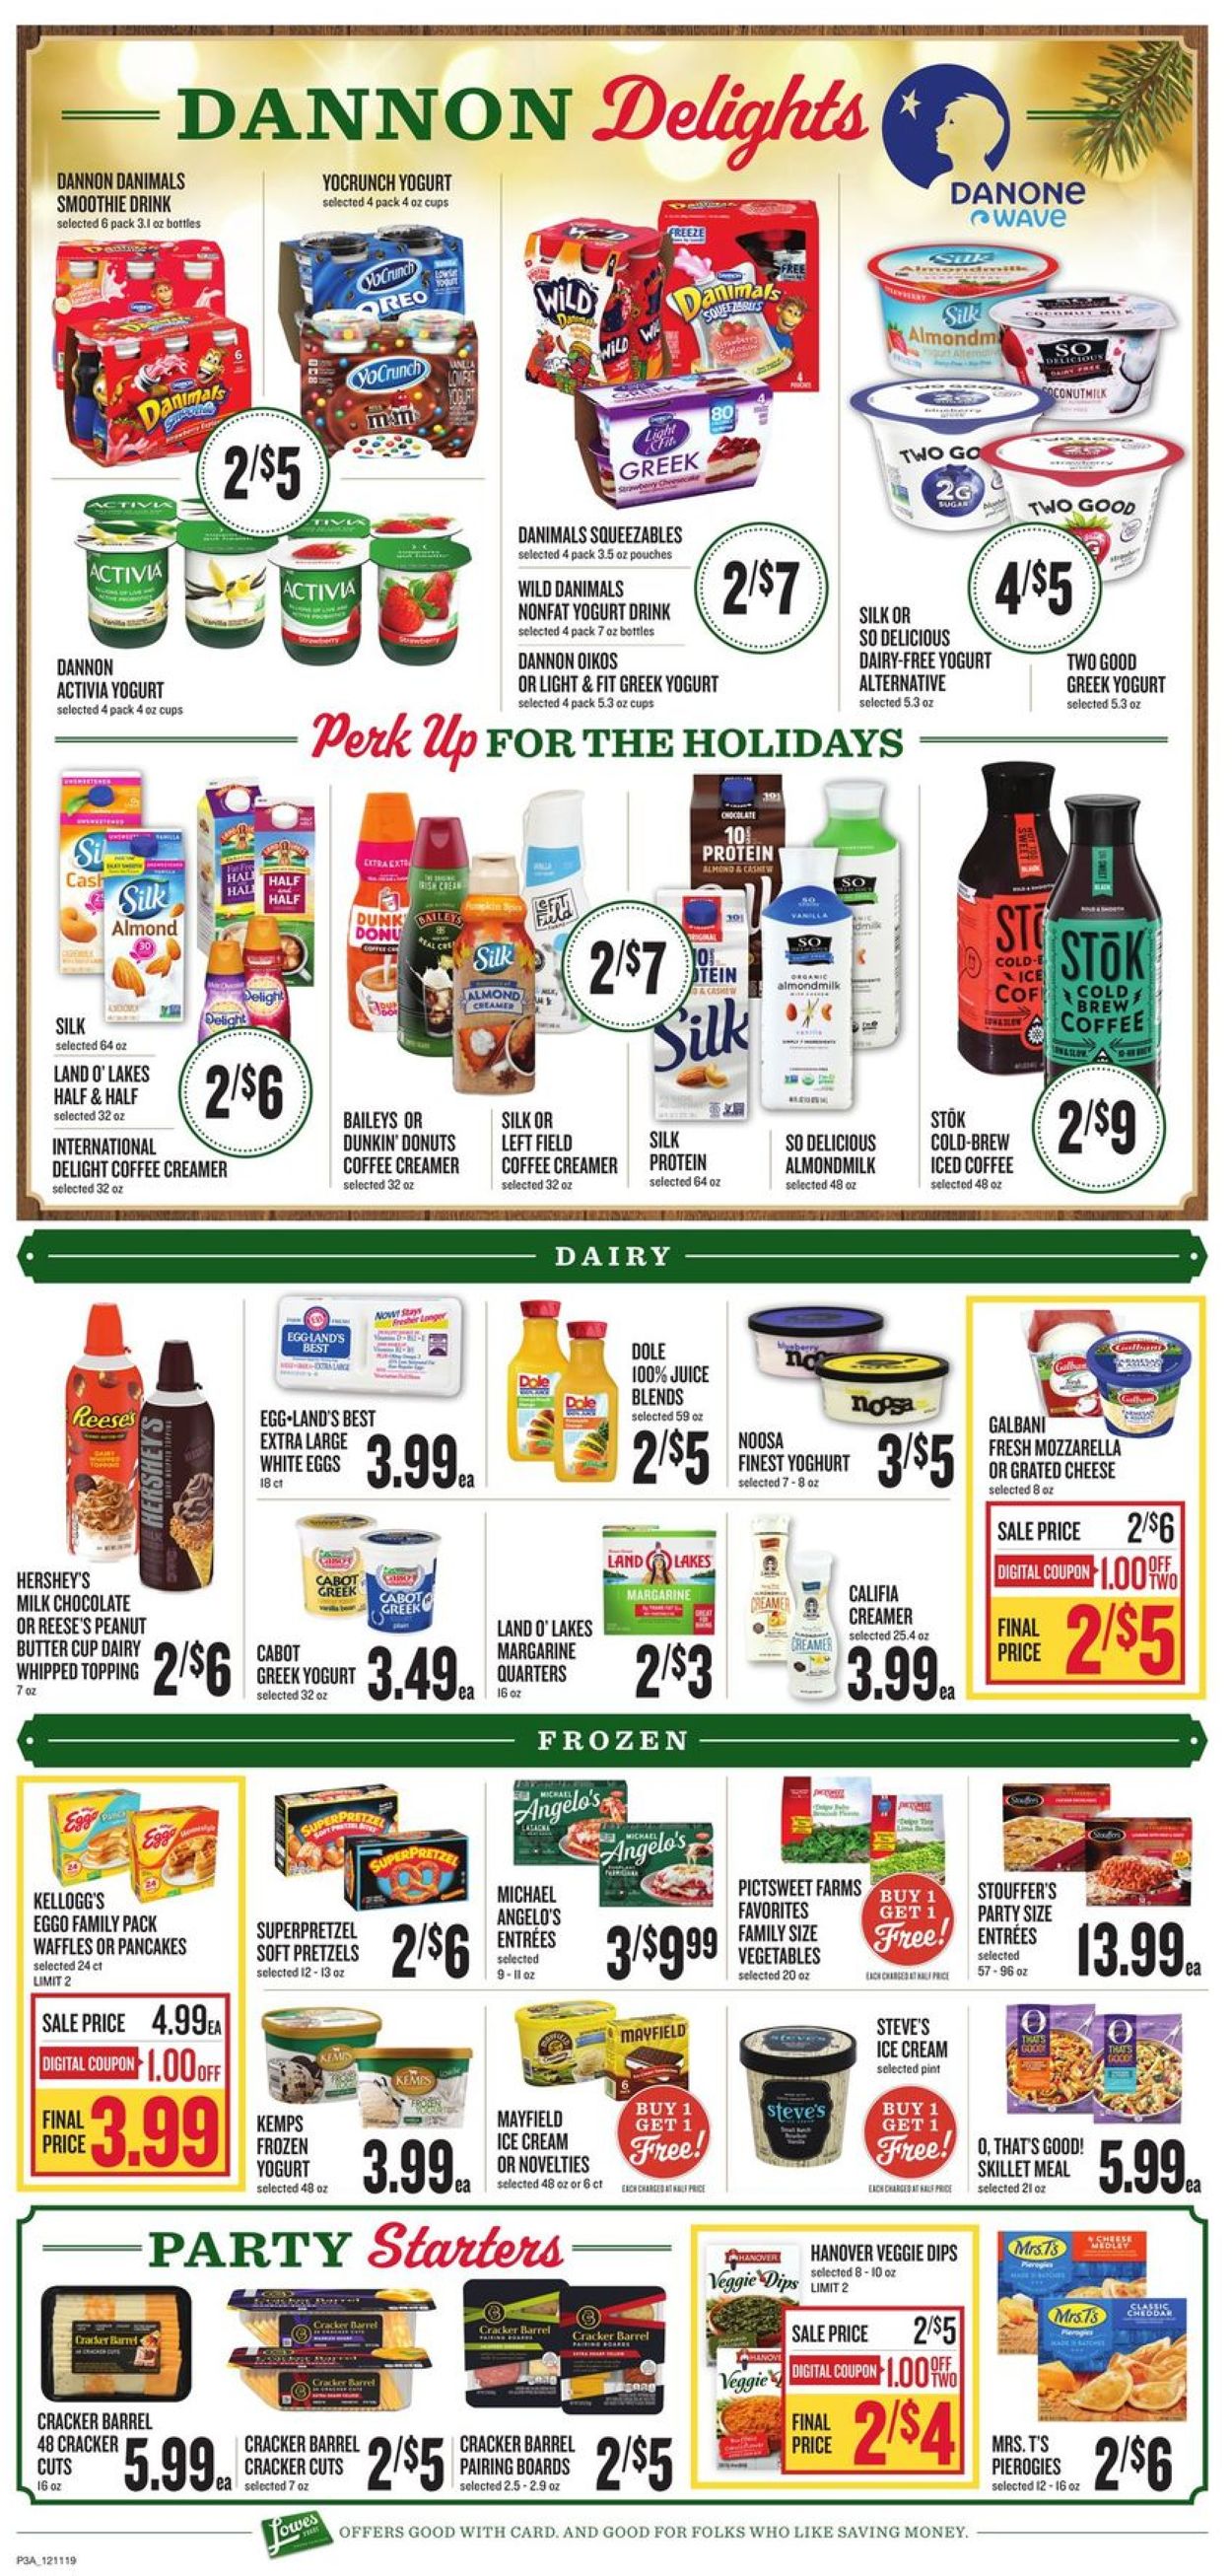 Lowes Foods - Holiday Ad 2019 Weekly Ad Circular - valid 12/11-12/17/2019 (Page 7)